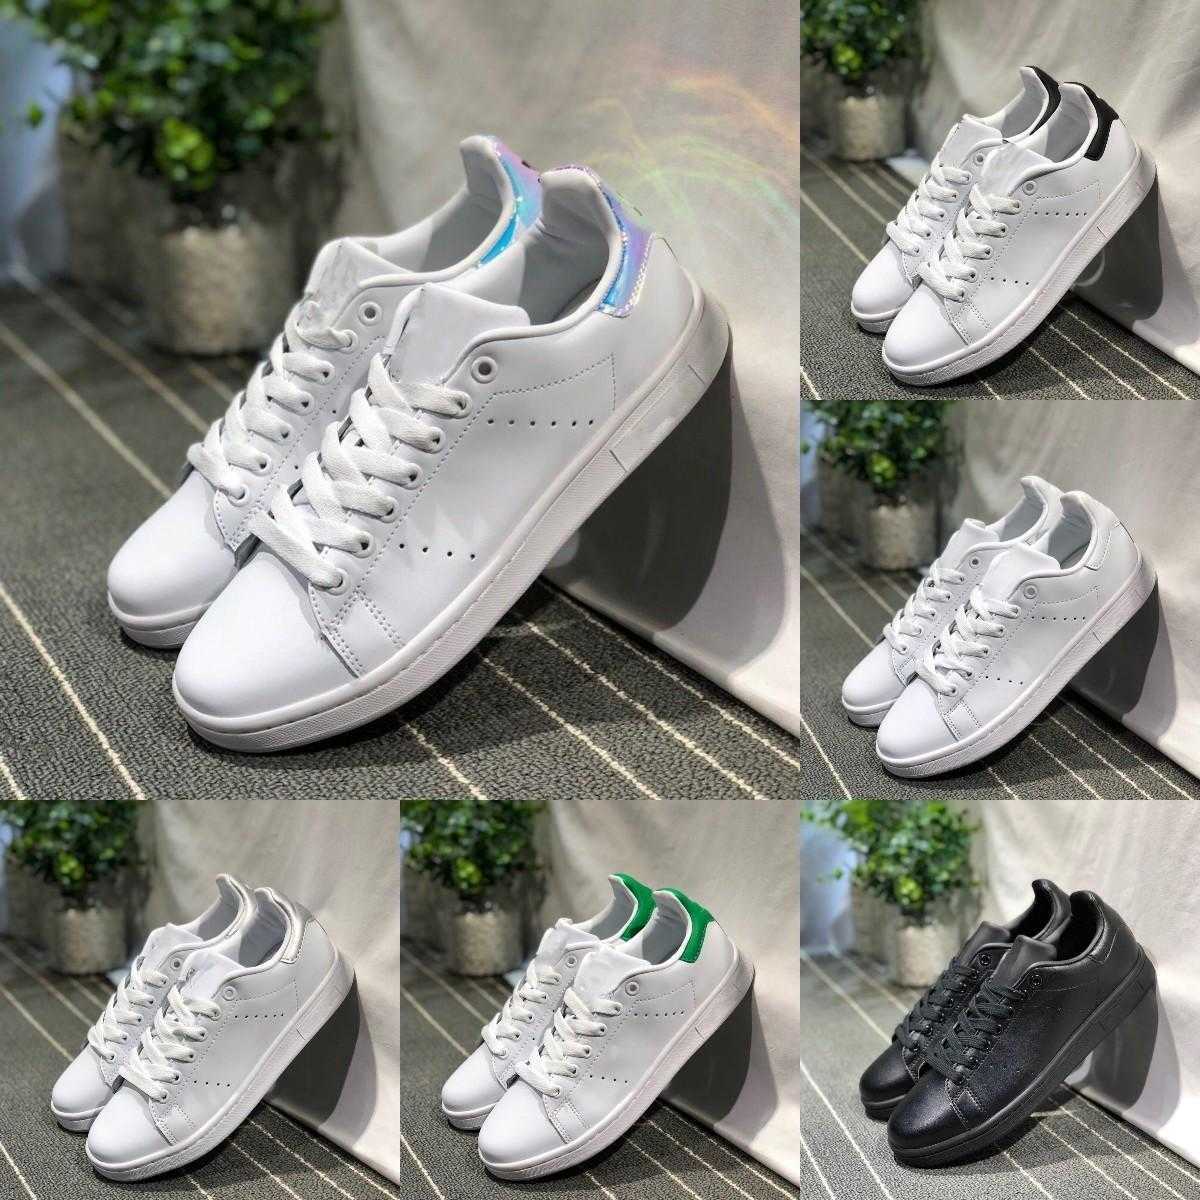 

2022 Mens Womens Free Superstar Casual Shoes Designer White Black Pink Blue Gold Superstars 80s Pride Sneakers Super Star Women Men Sport Sneakers Y001, Please contact us